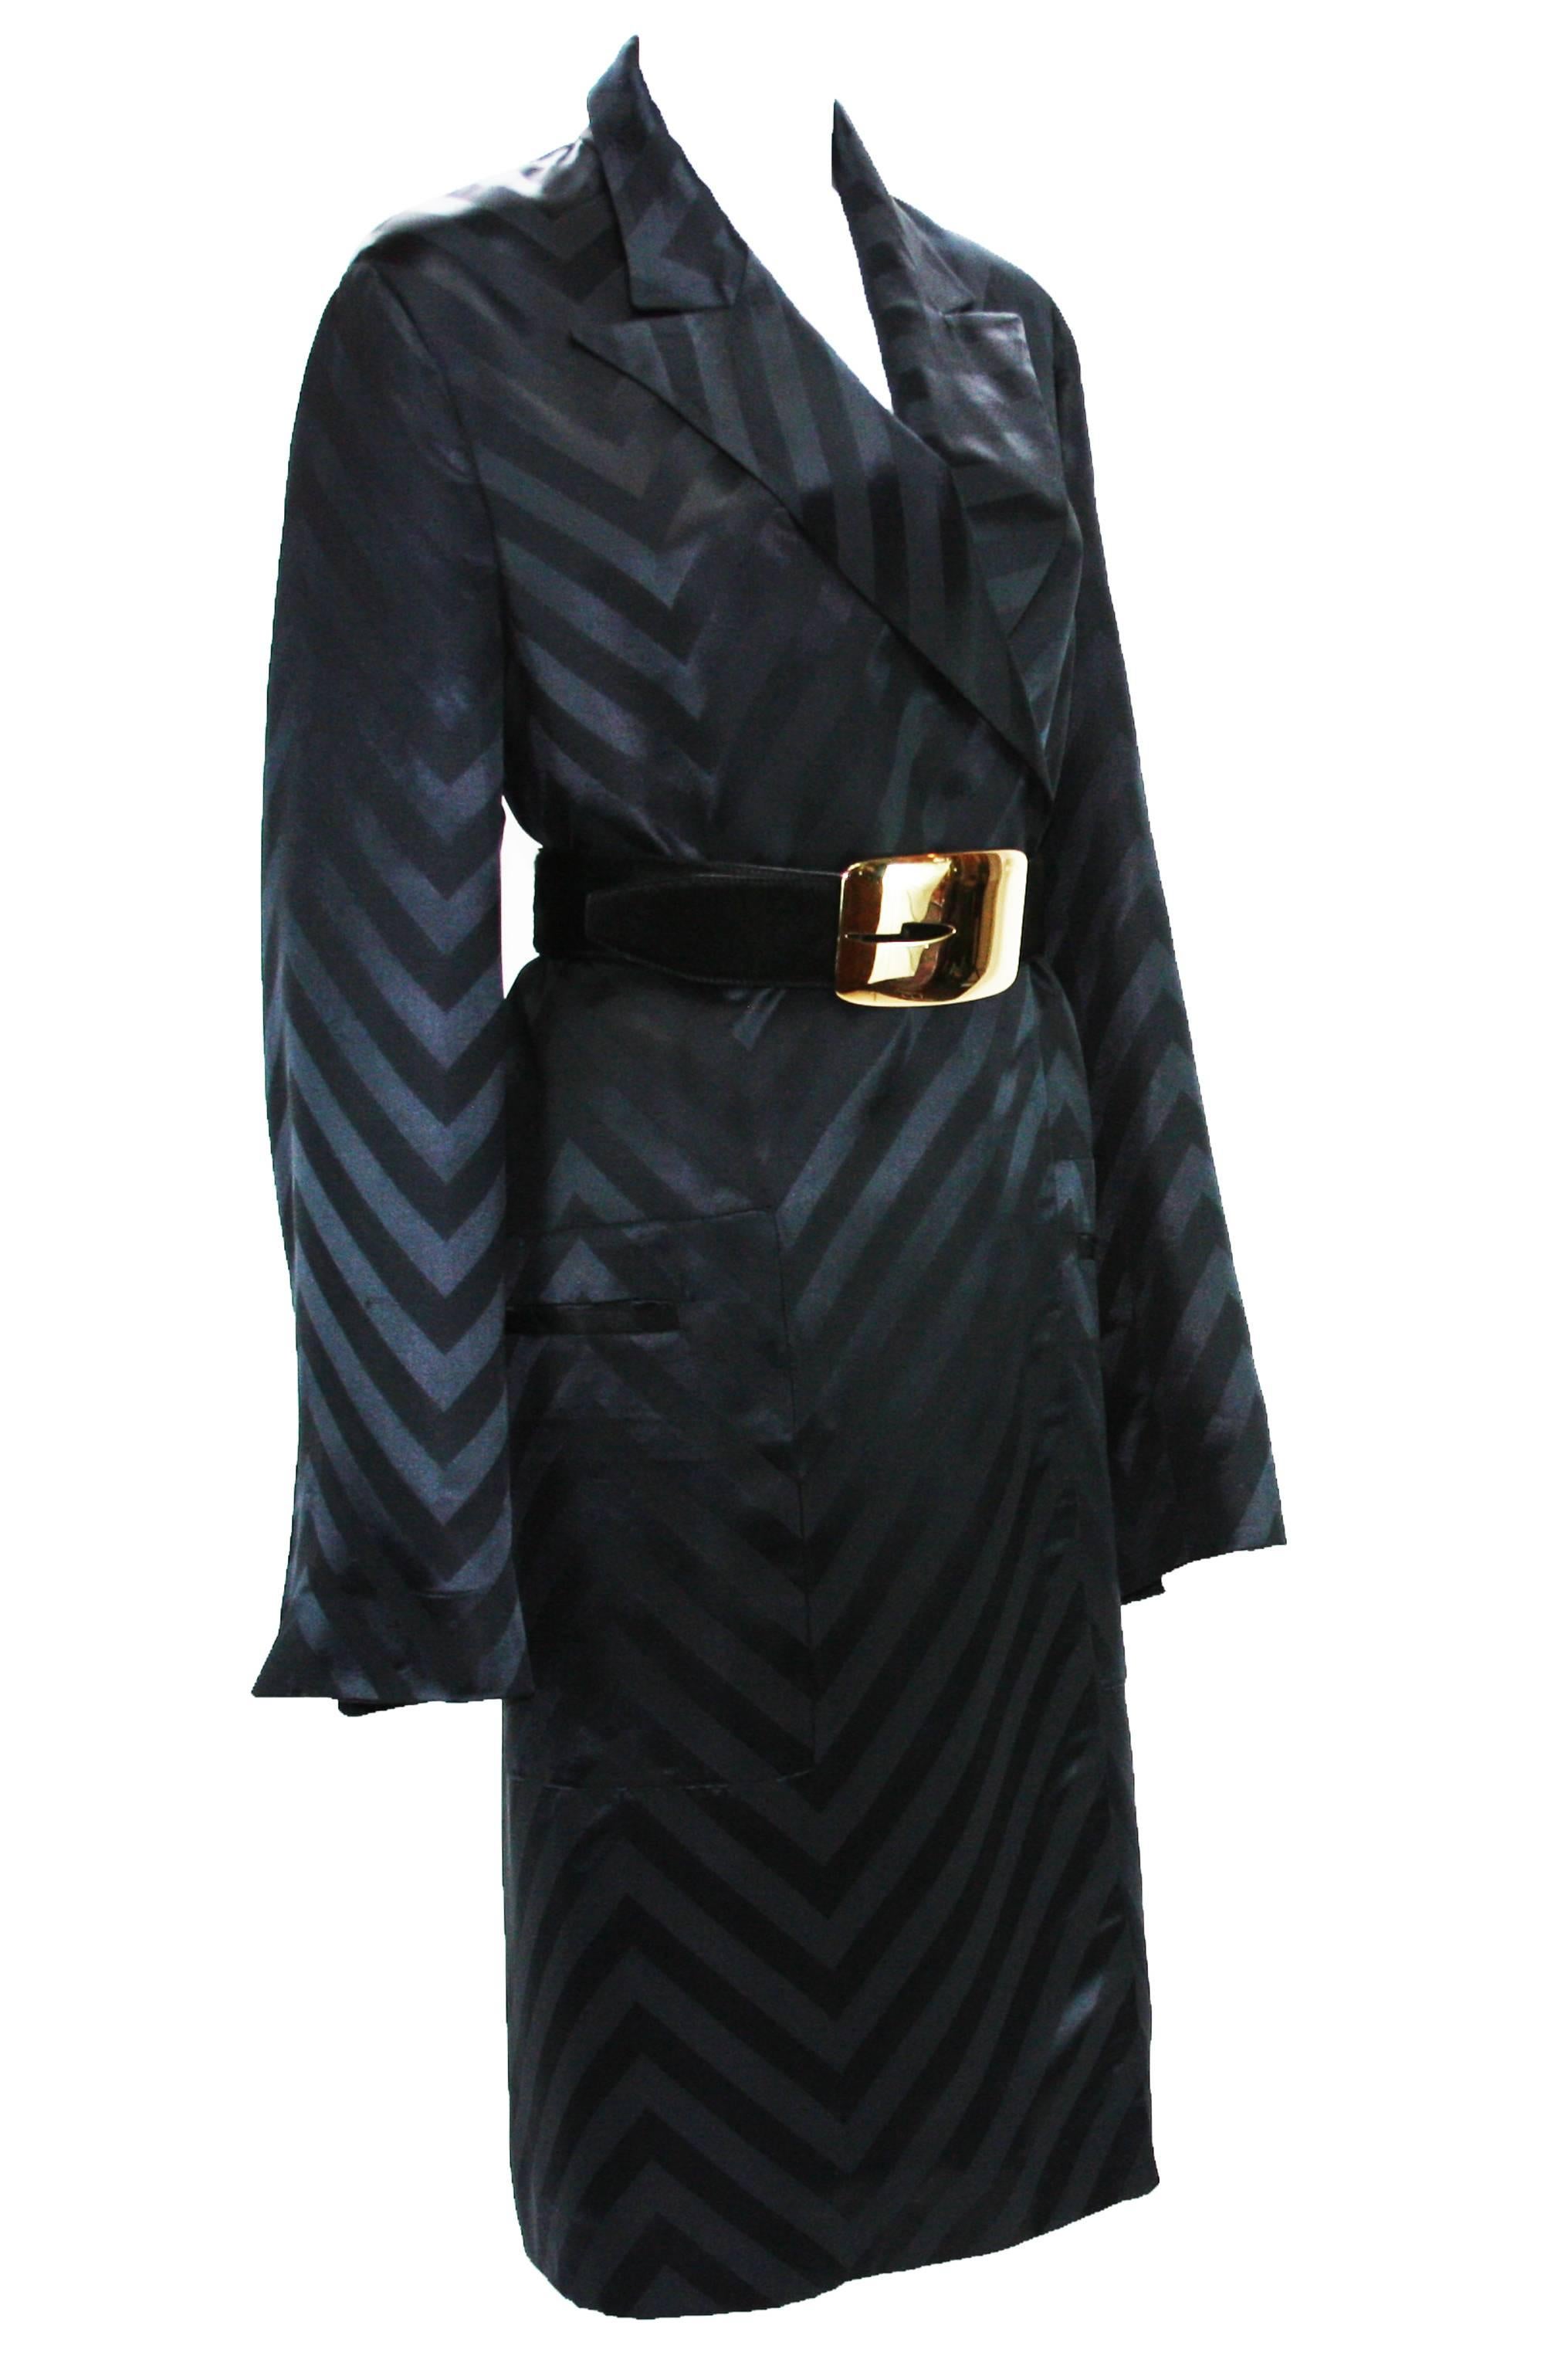 Tom Ford for Gucci Kimono Coat
F/W 2002 Gothic Collection
IT size 40 (will fit other sizes because of style)
Color - Black
100% Silk
Chevron Pattern
Two Deep Front Pocket
Two Inner Pockets
Fully Lined - 100% Silk
Open Style
Measurements